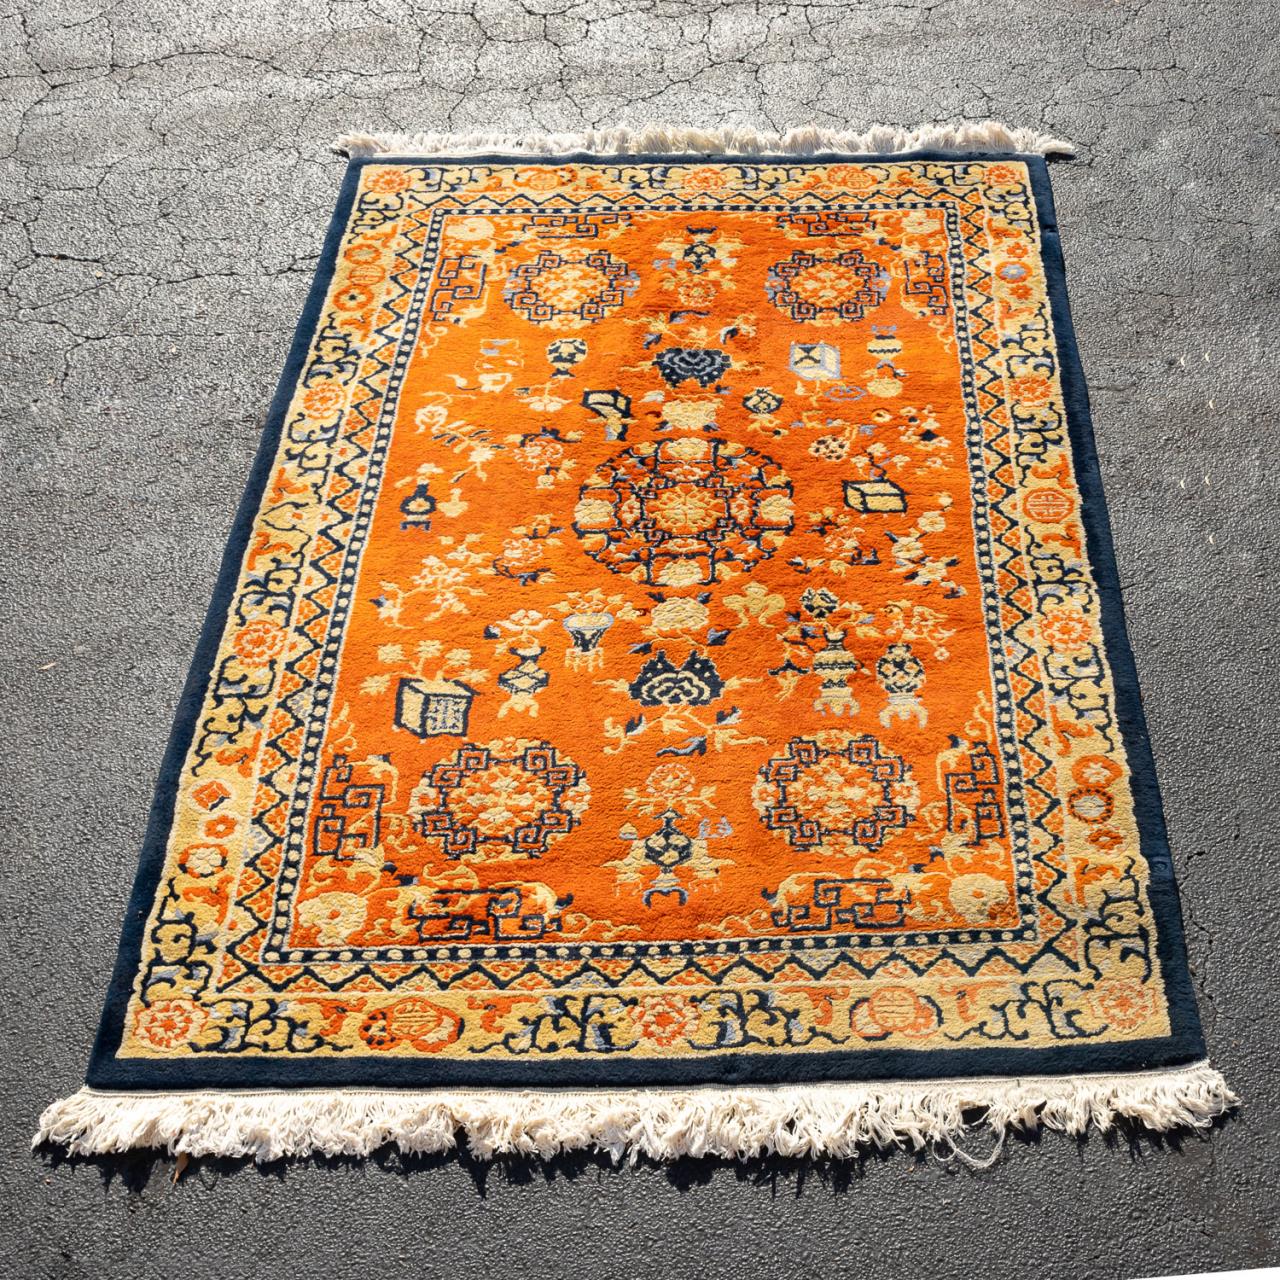 HAND WOVEN INDO CHINESE RUG, 8'